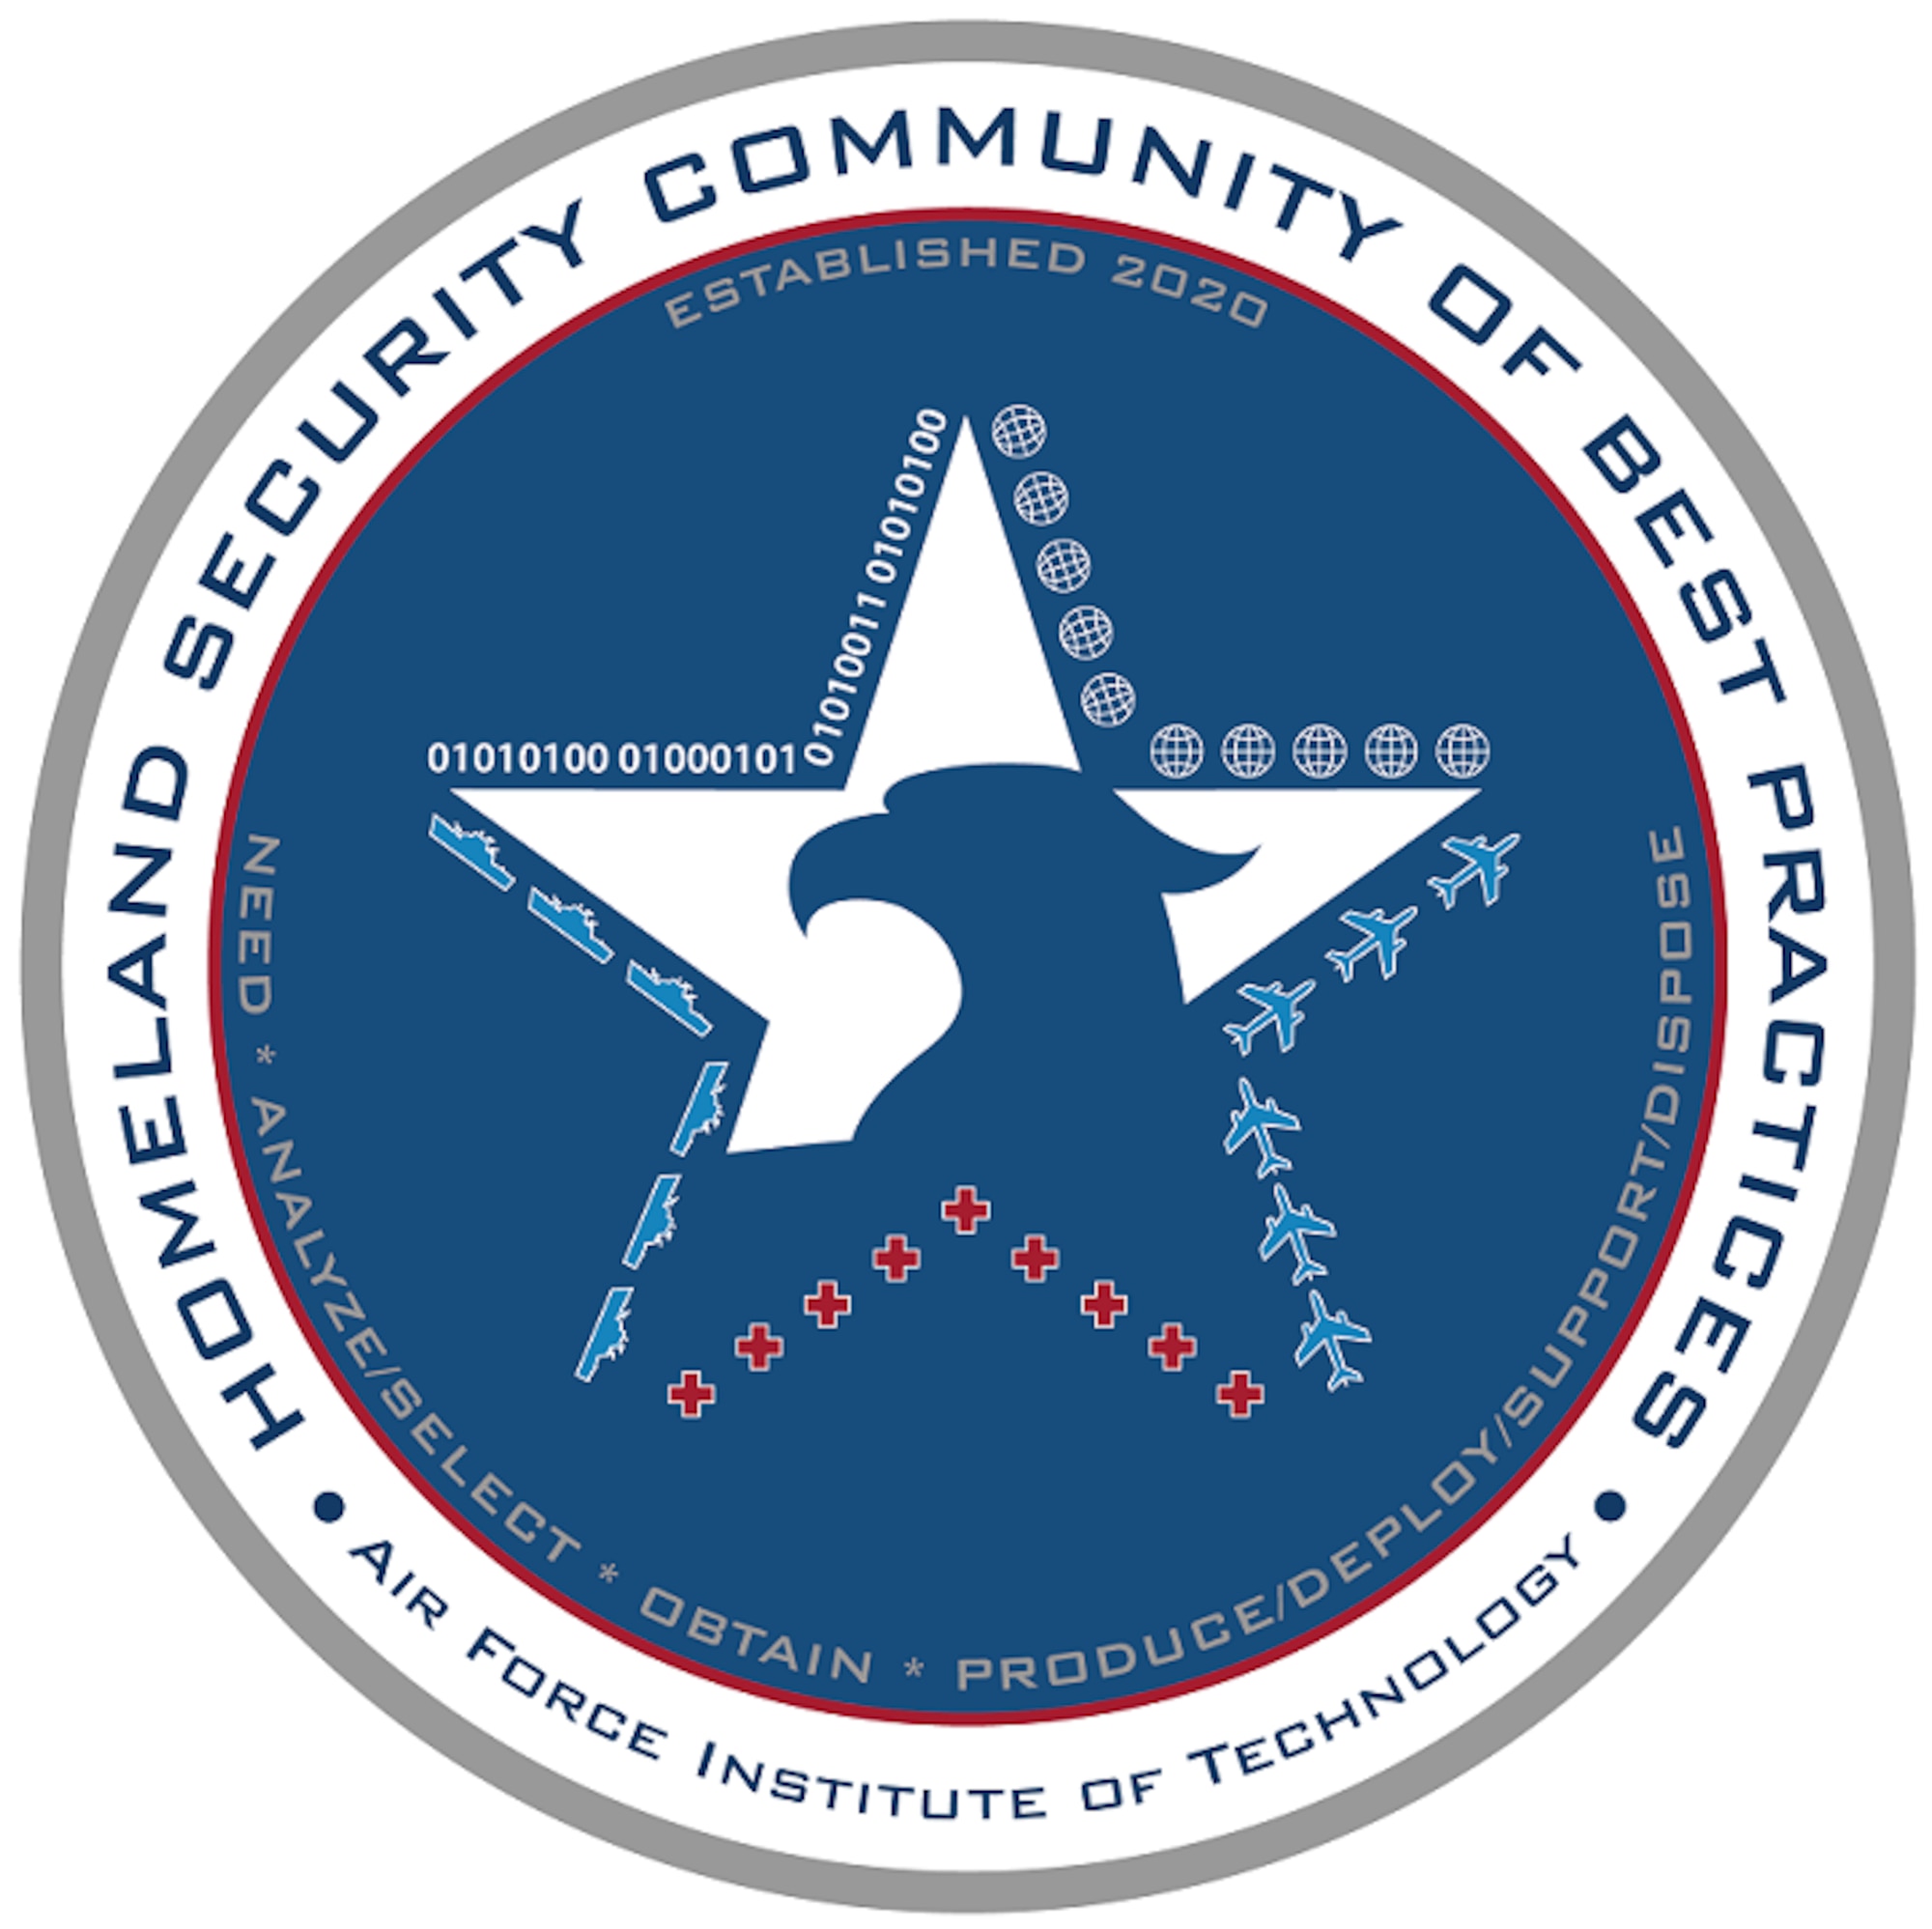 The Department of Homeland Security in partnership with the Air Force Institute of Technology established the Homeland Security Community of Best Practices